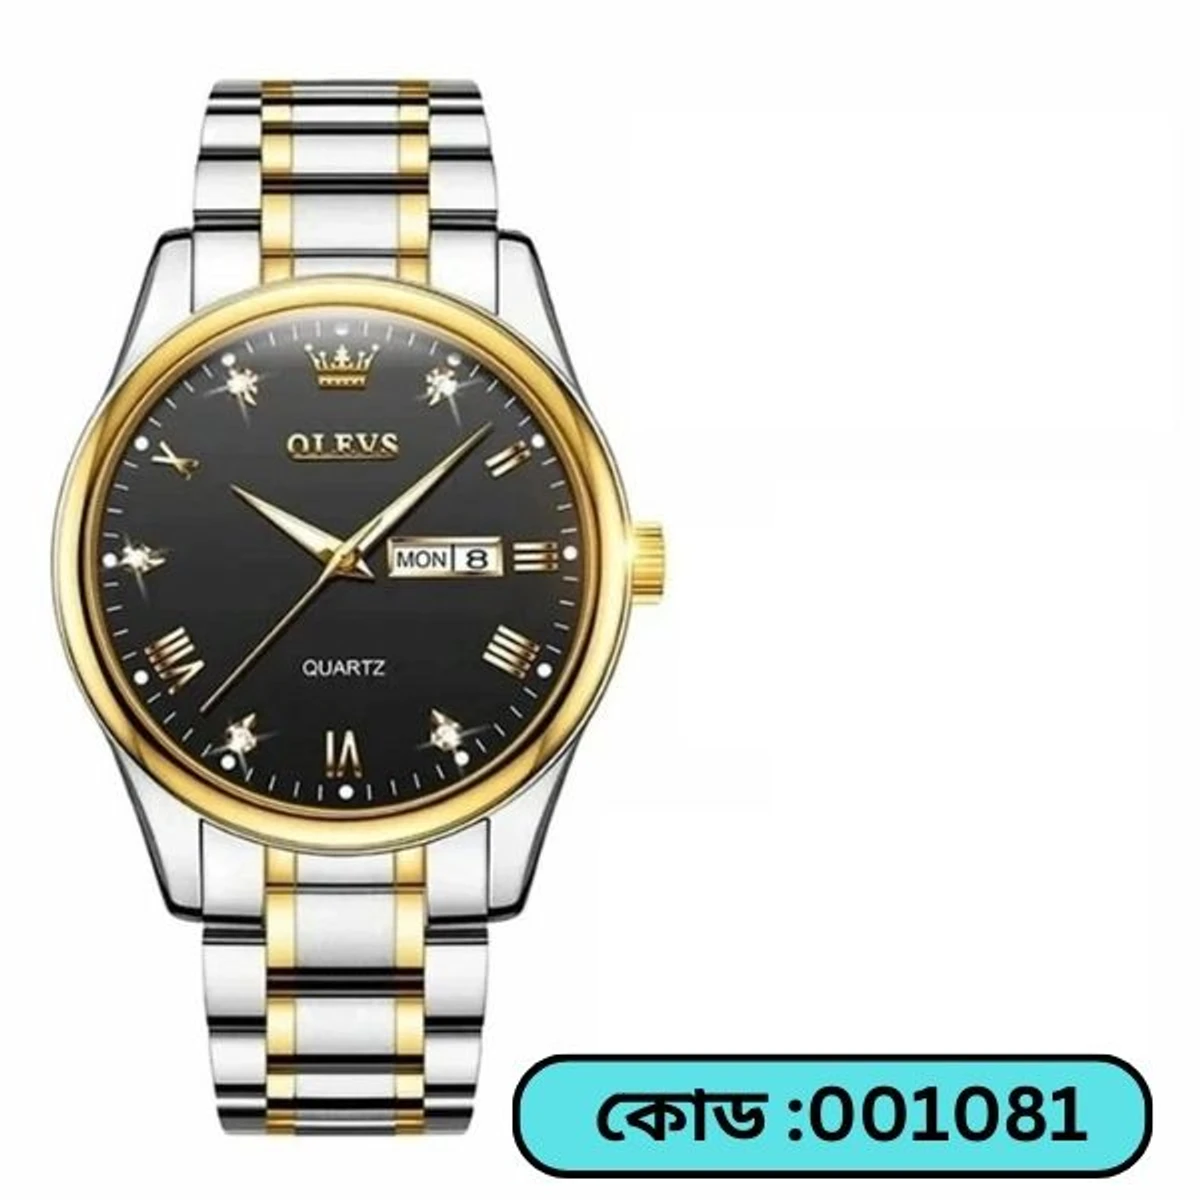 Top Brand OLEVS 5563 MODEL TOTON AR DIAL BLACK COLOUR WATCH FOR MAN